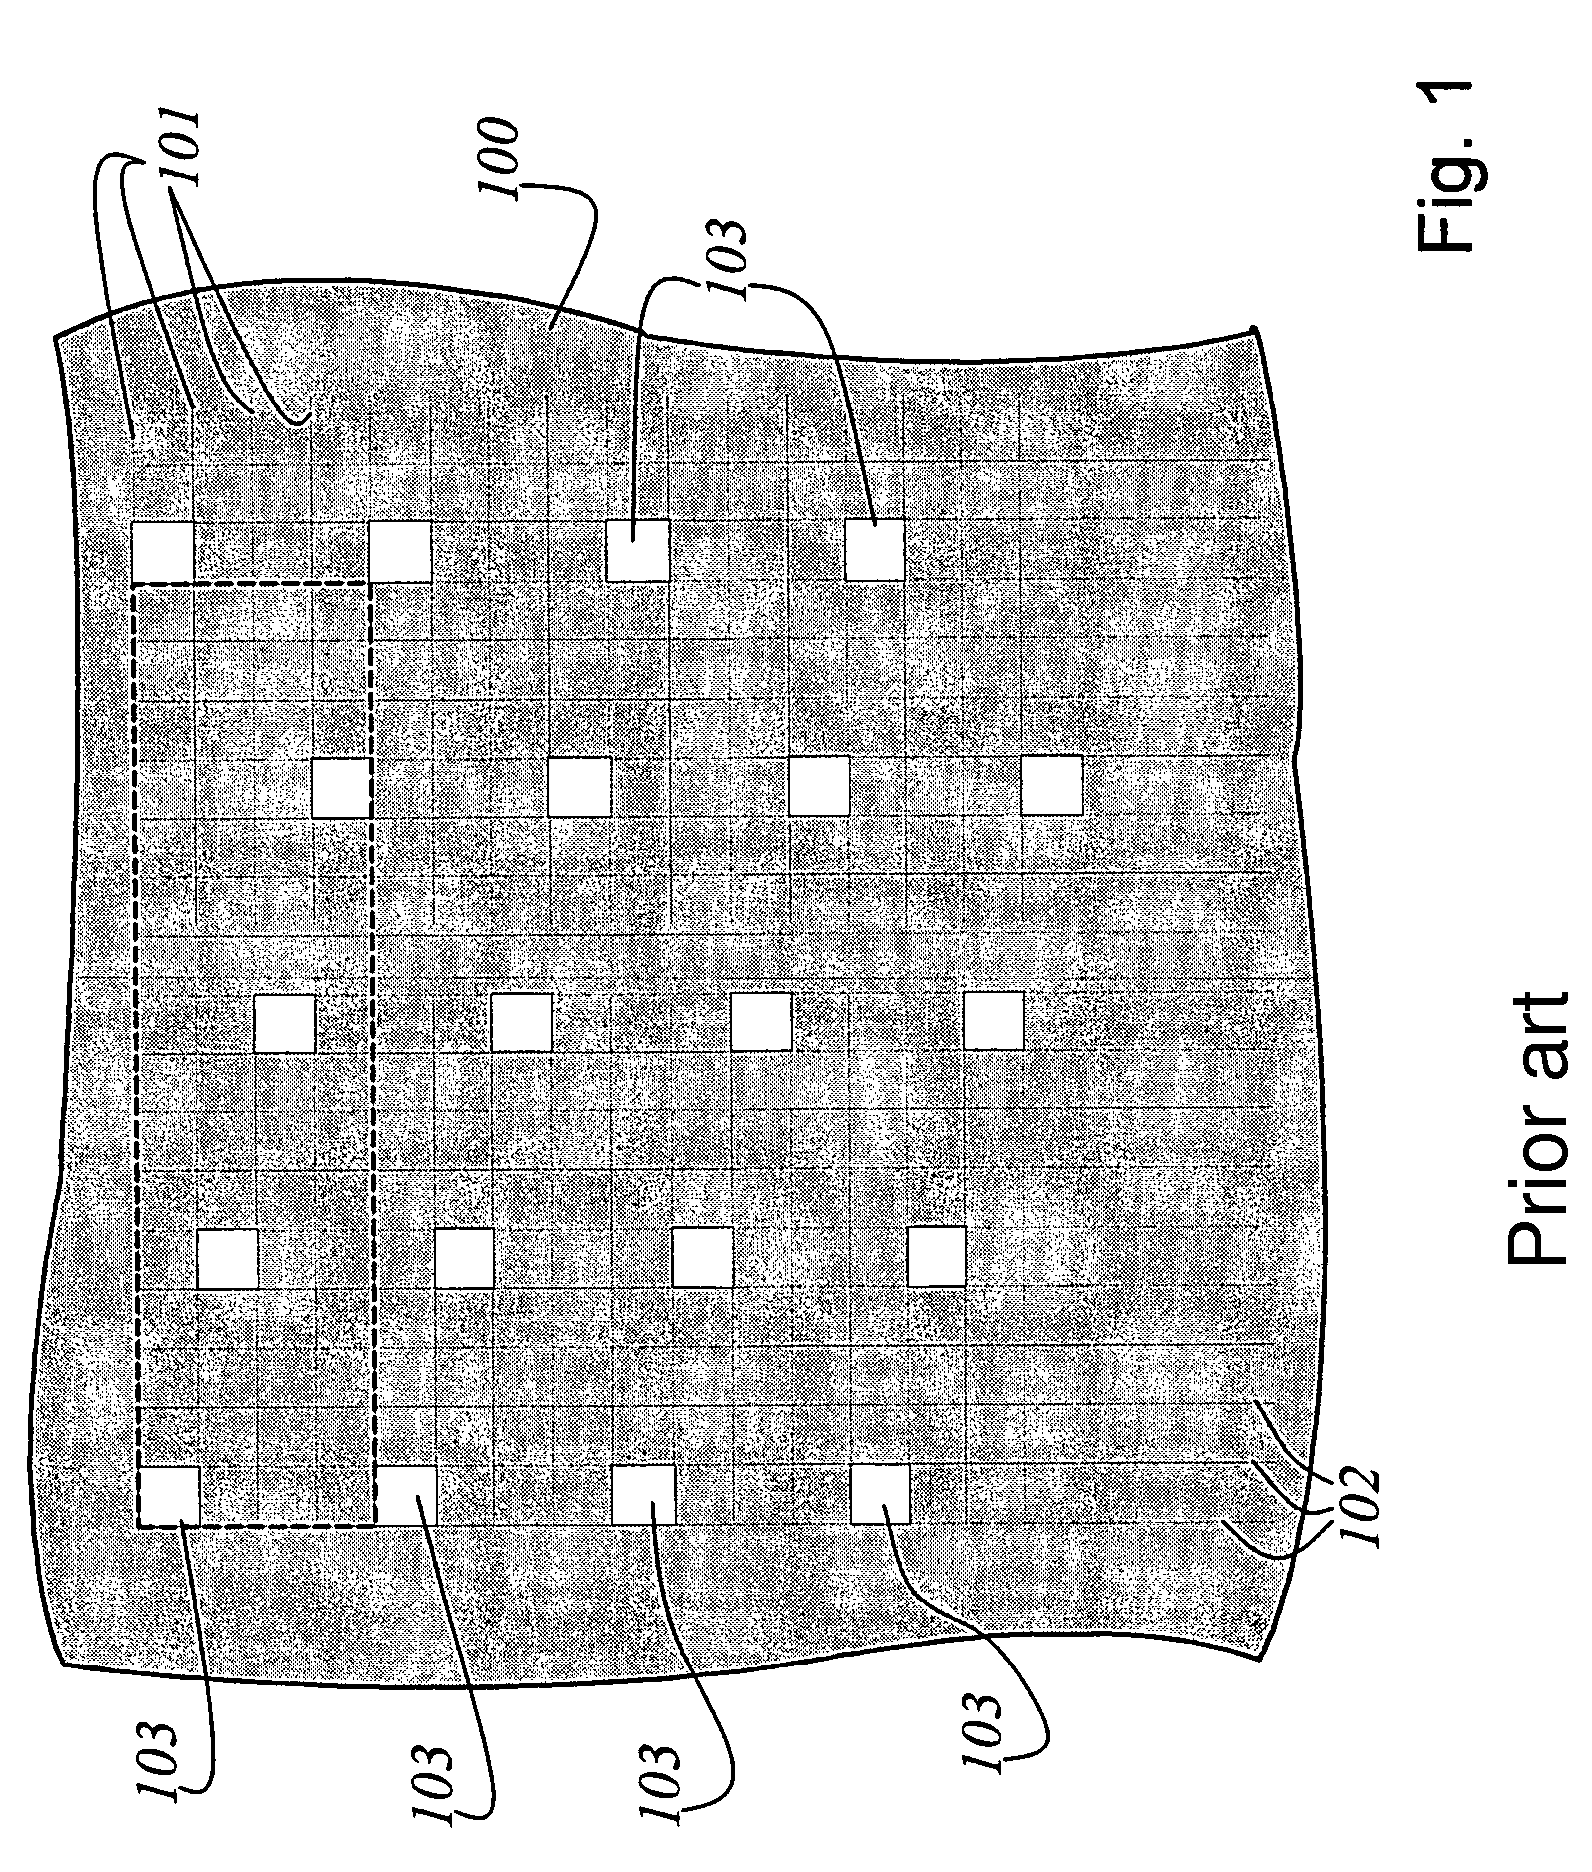 Multi-beam modulator for a particle beam and use of the multi-beam modulator for the maskless structuring of a substrate